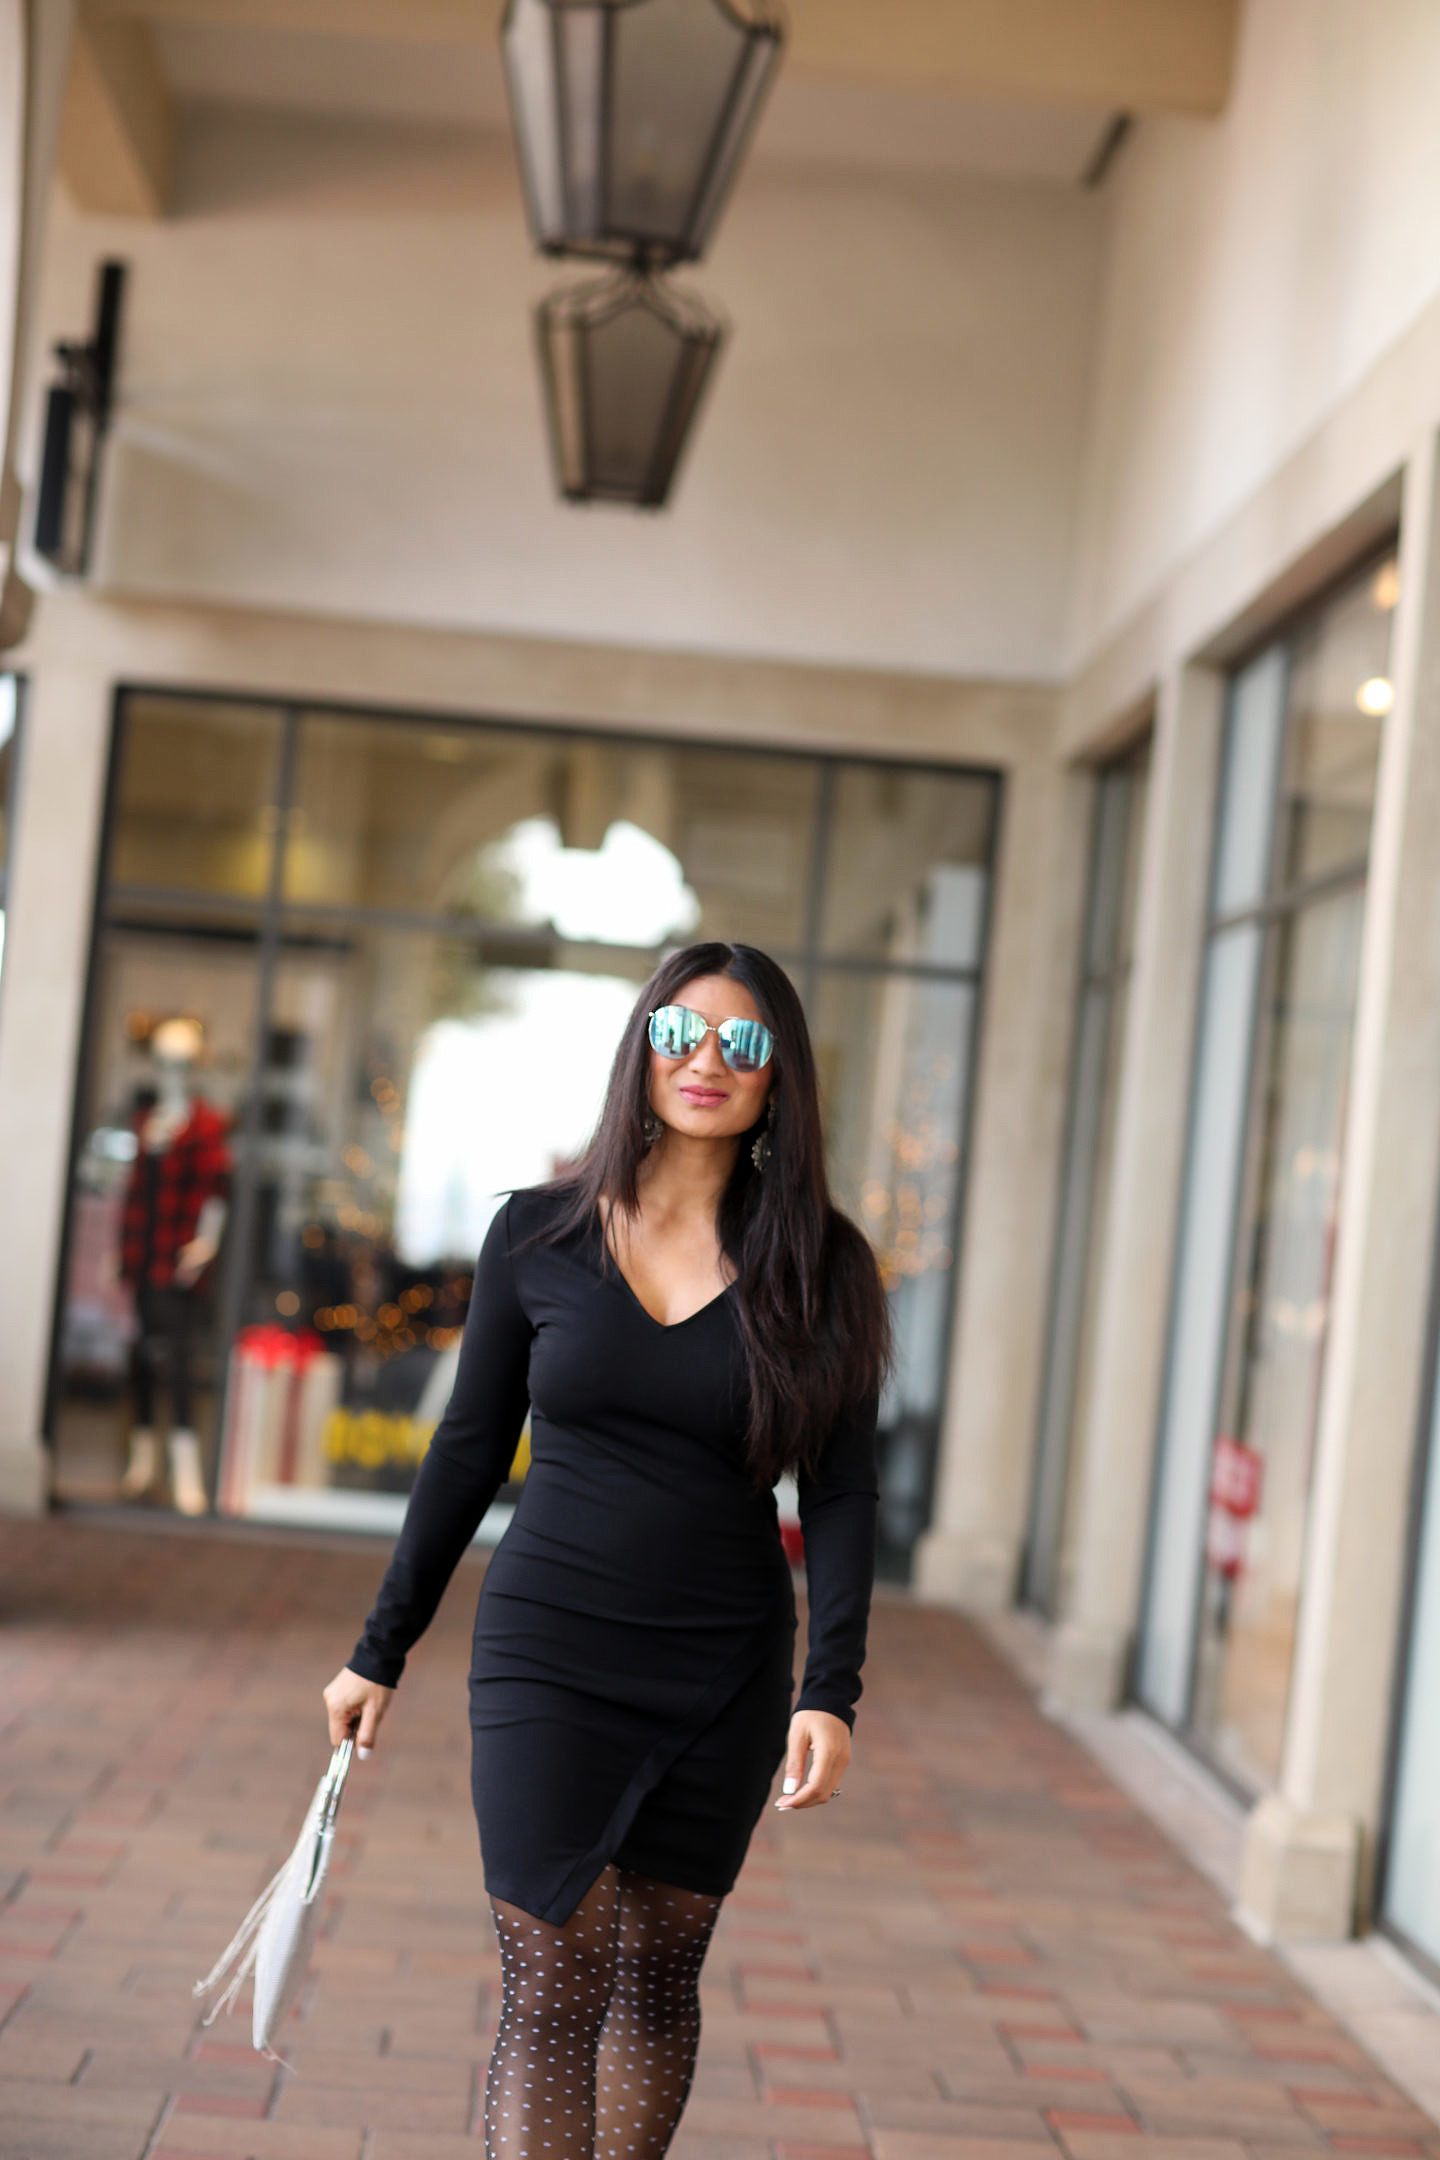 Click HERE if you have been searching for the perfect LBD without any luck! Orange County Blogger Debbie Savage is sharing her favorite LBD with unexpected details and why everyone should grab a LBD ASAP! See why HERE!